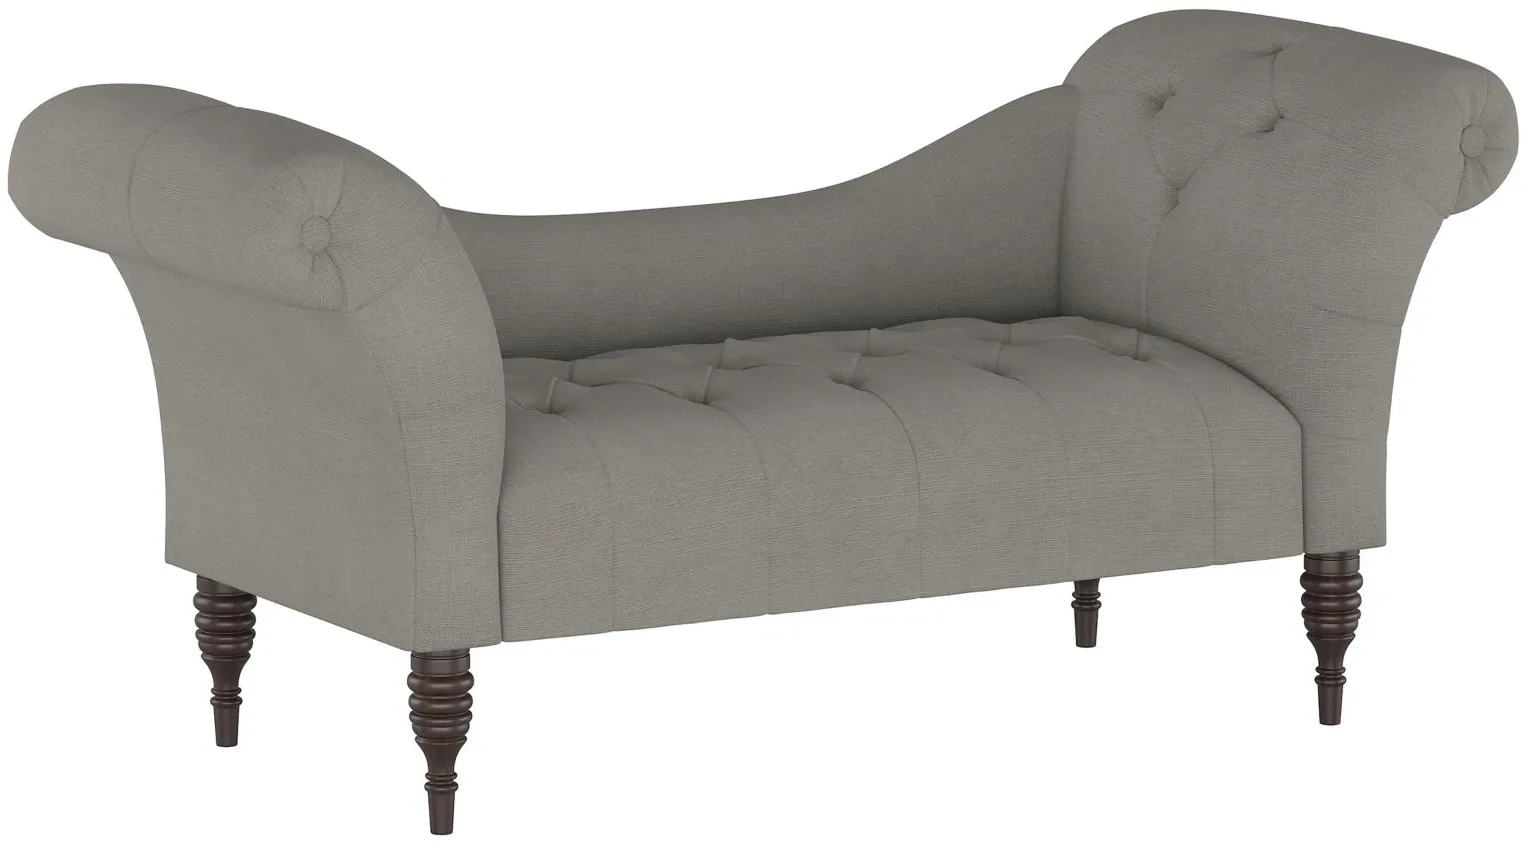 Lansing Chaise Lounge in Linen Grey by Skyline